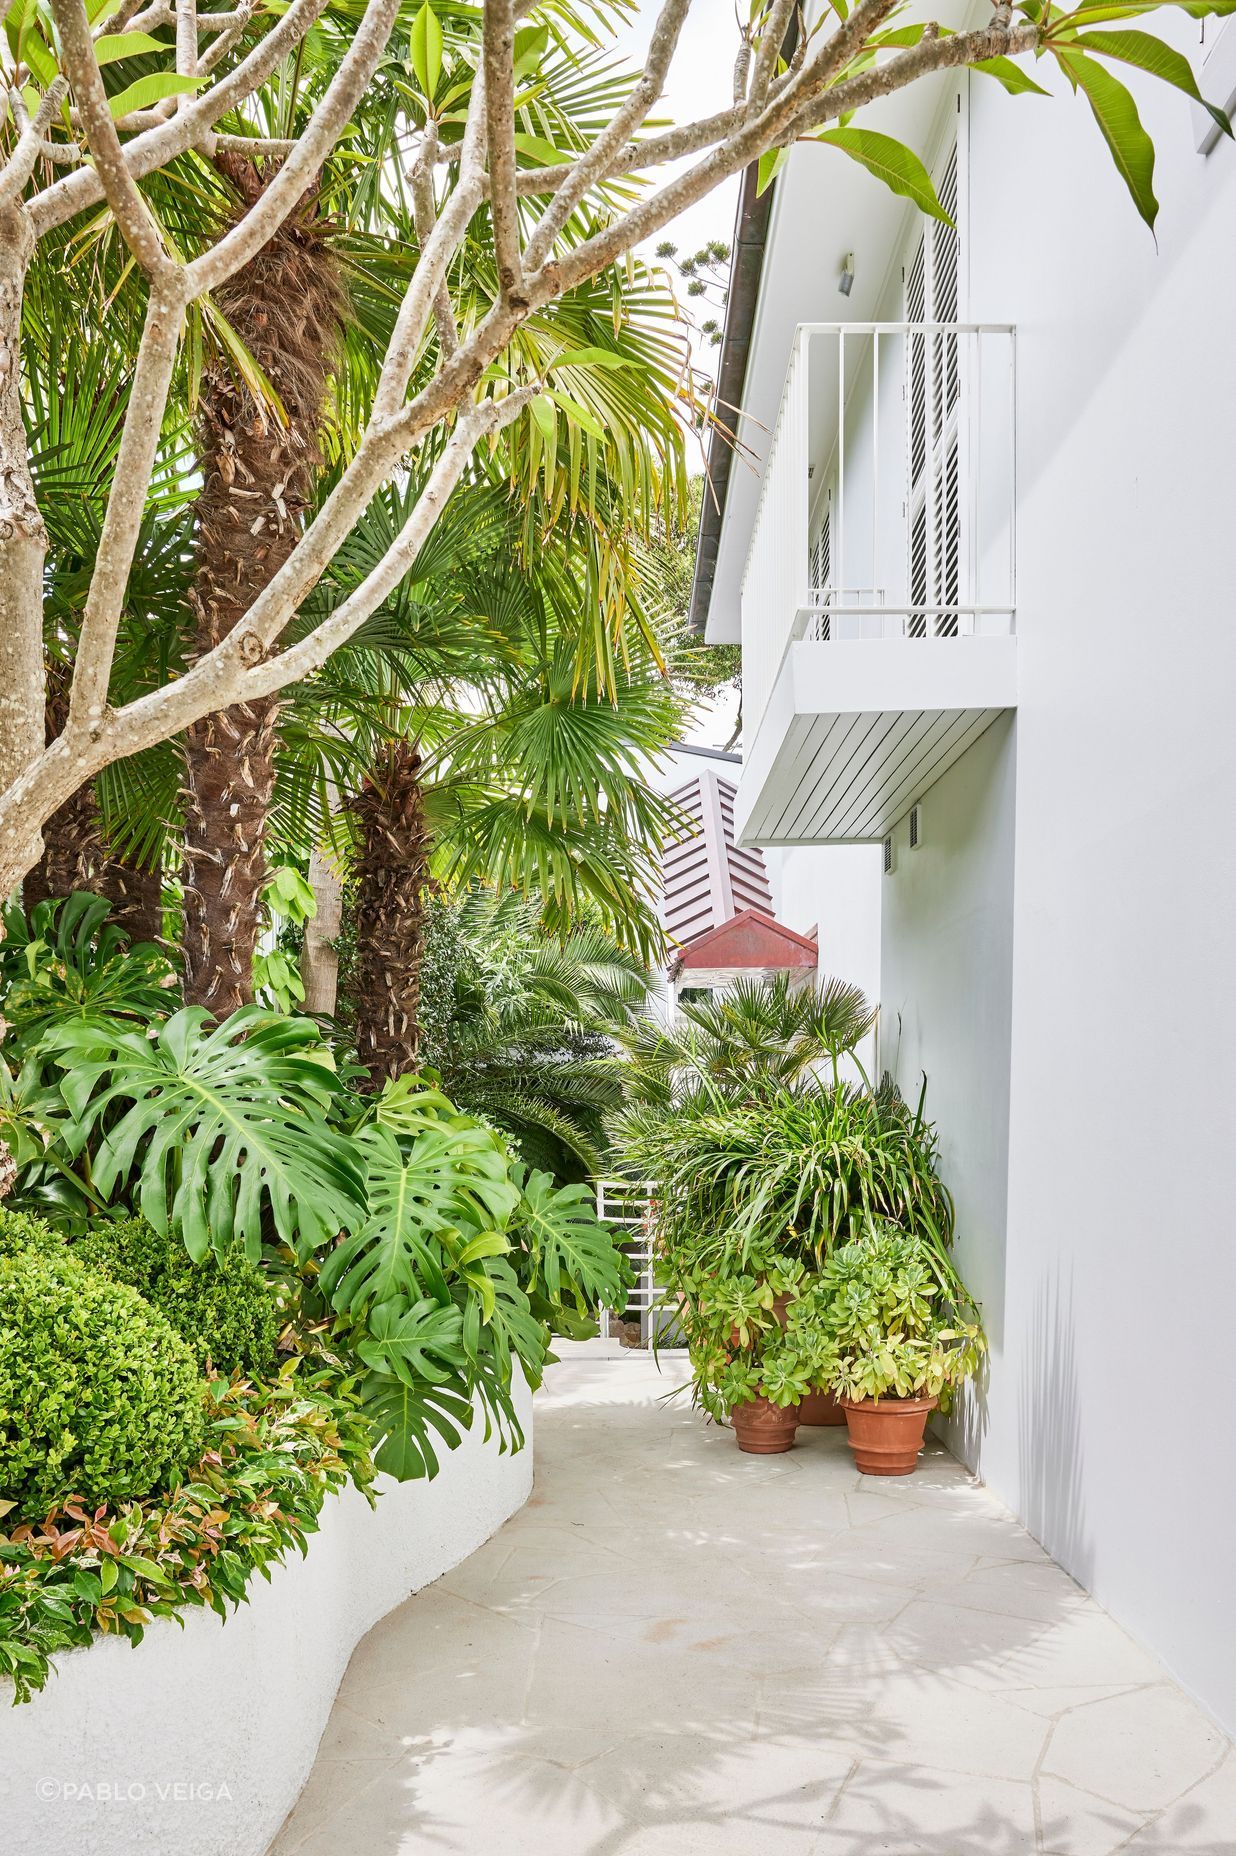 At the entrance, a wall of trailing Beaumont grandiflora creates instant privacy from the street while two Chamaerops humilis (European Fan Palm) and a single Plumeria (Frangipani) set the tone for a tropical-like paradise.